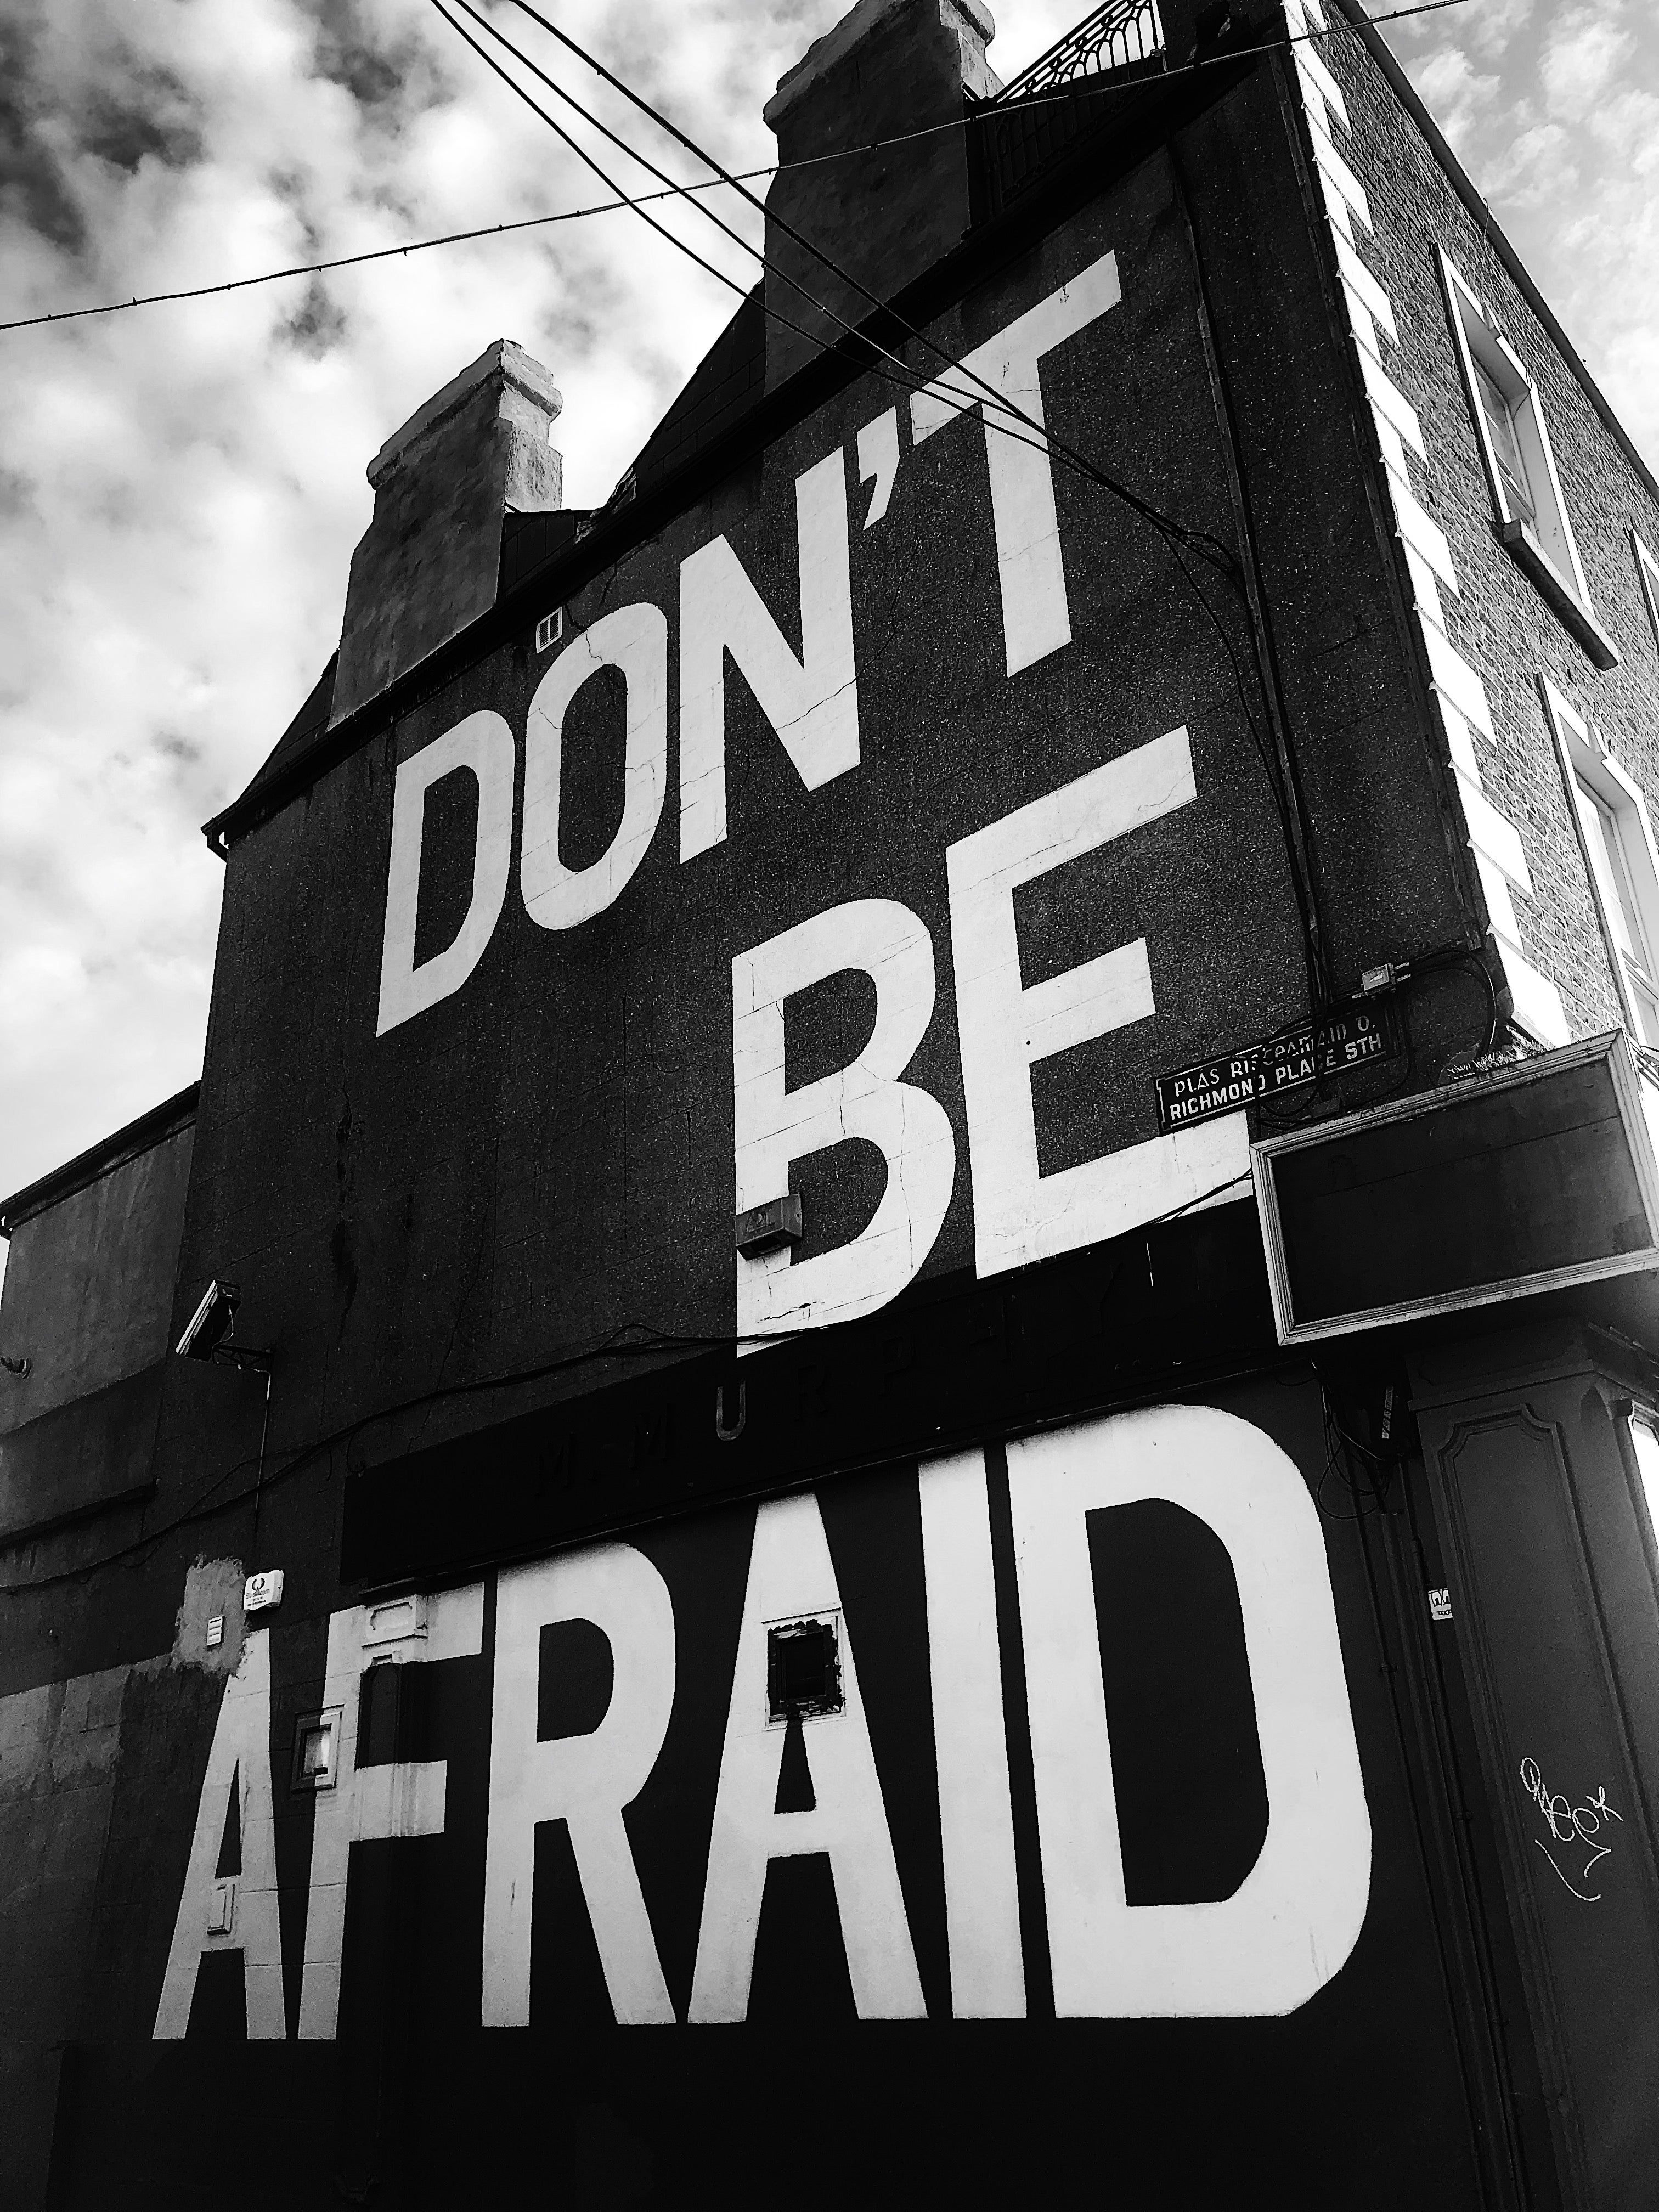 Mural on building facade reads 'Don't be afraid'